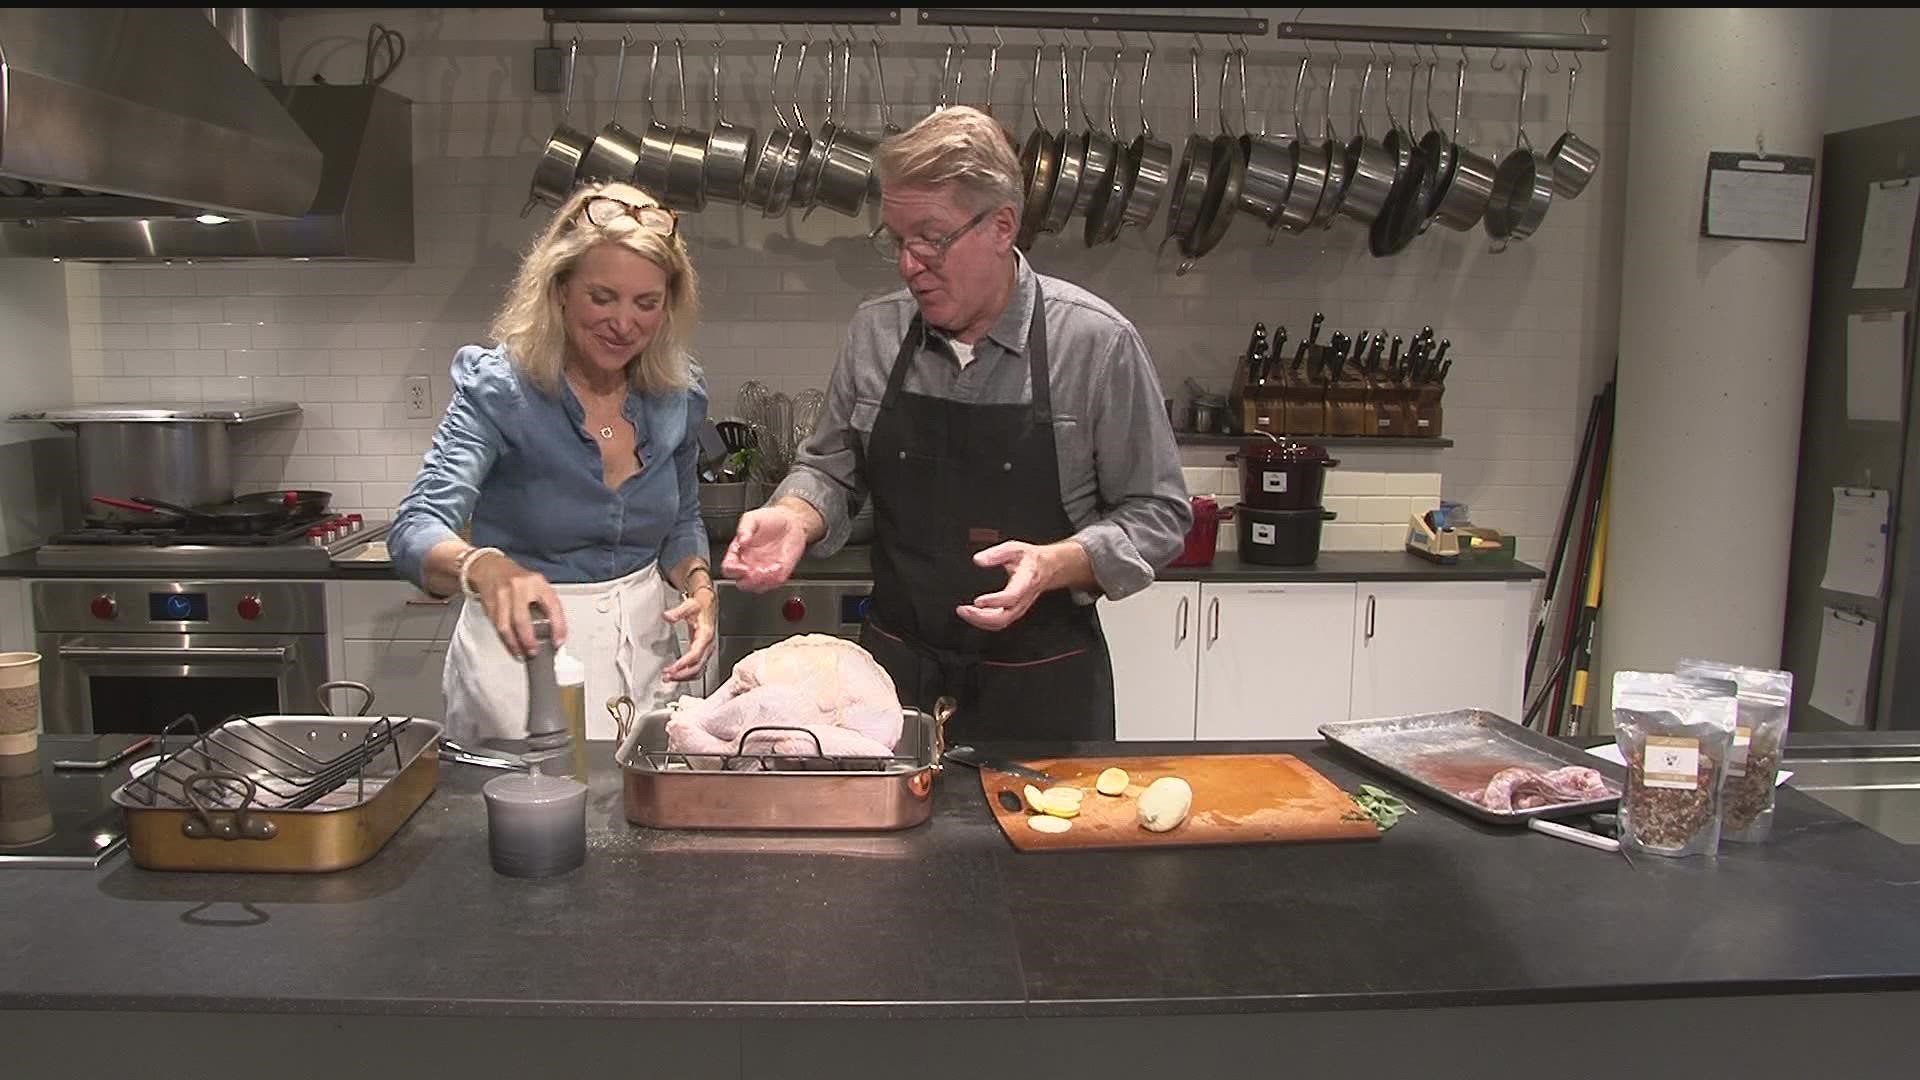 Karl Benson, owner of Cooks of Crocus Hill, offers tips for cooking up the perfect Thanksgiving turkey.